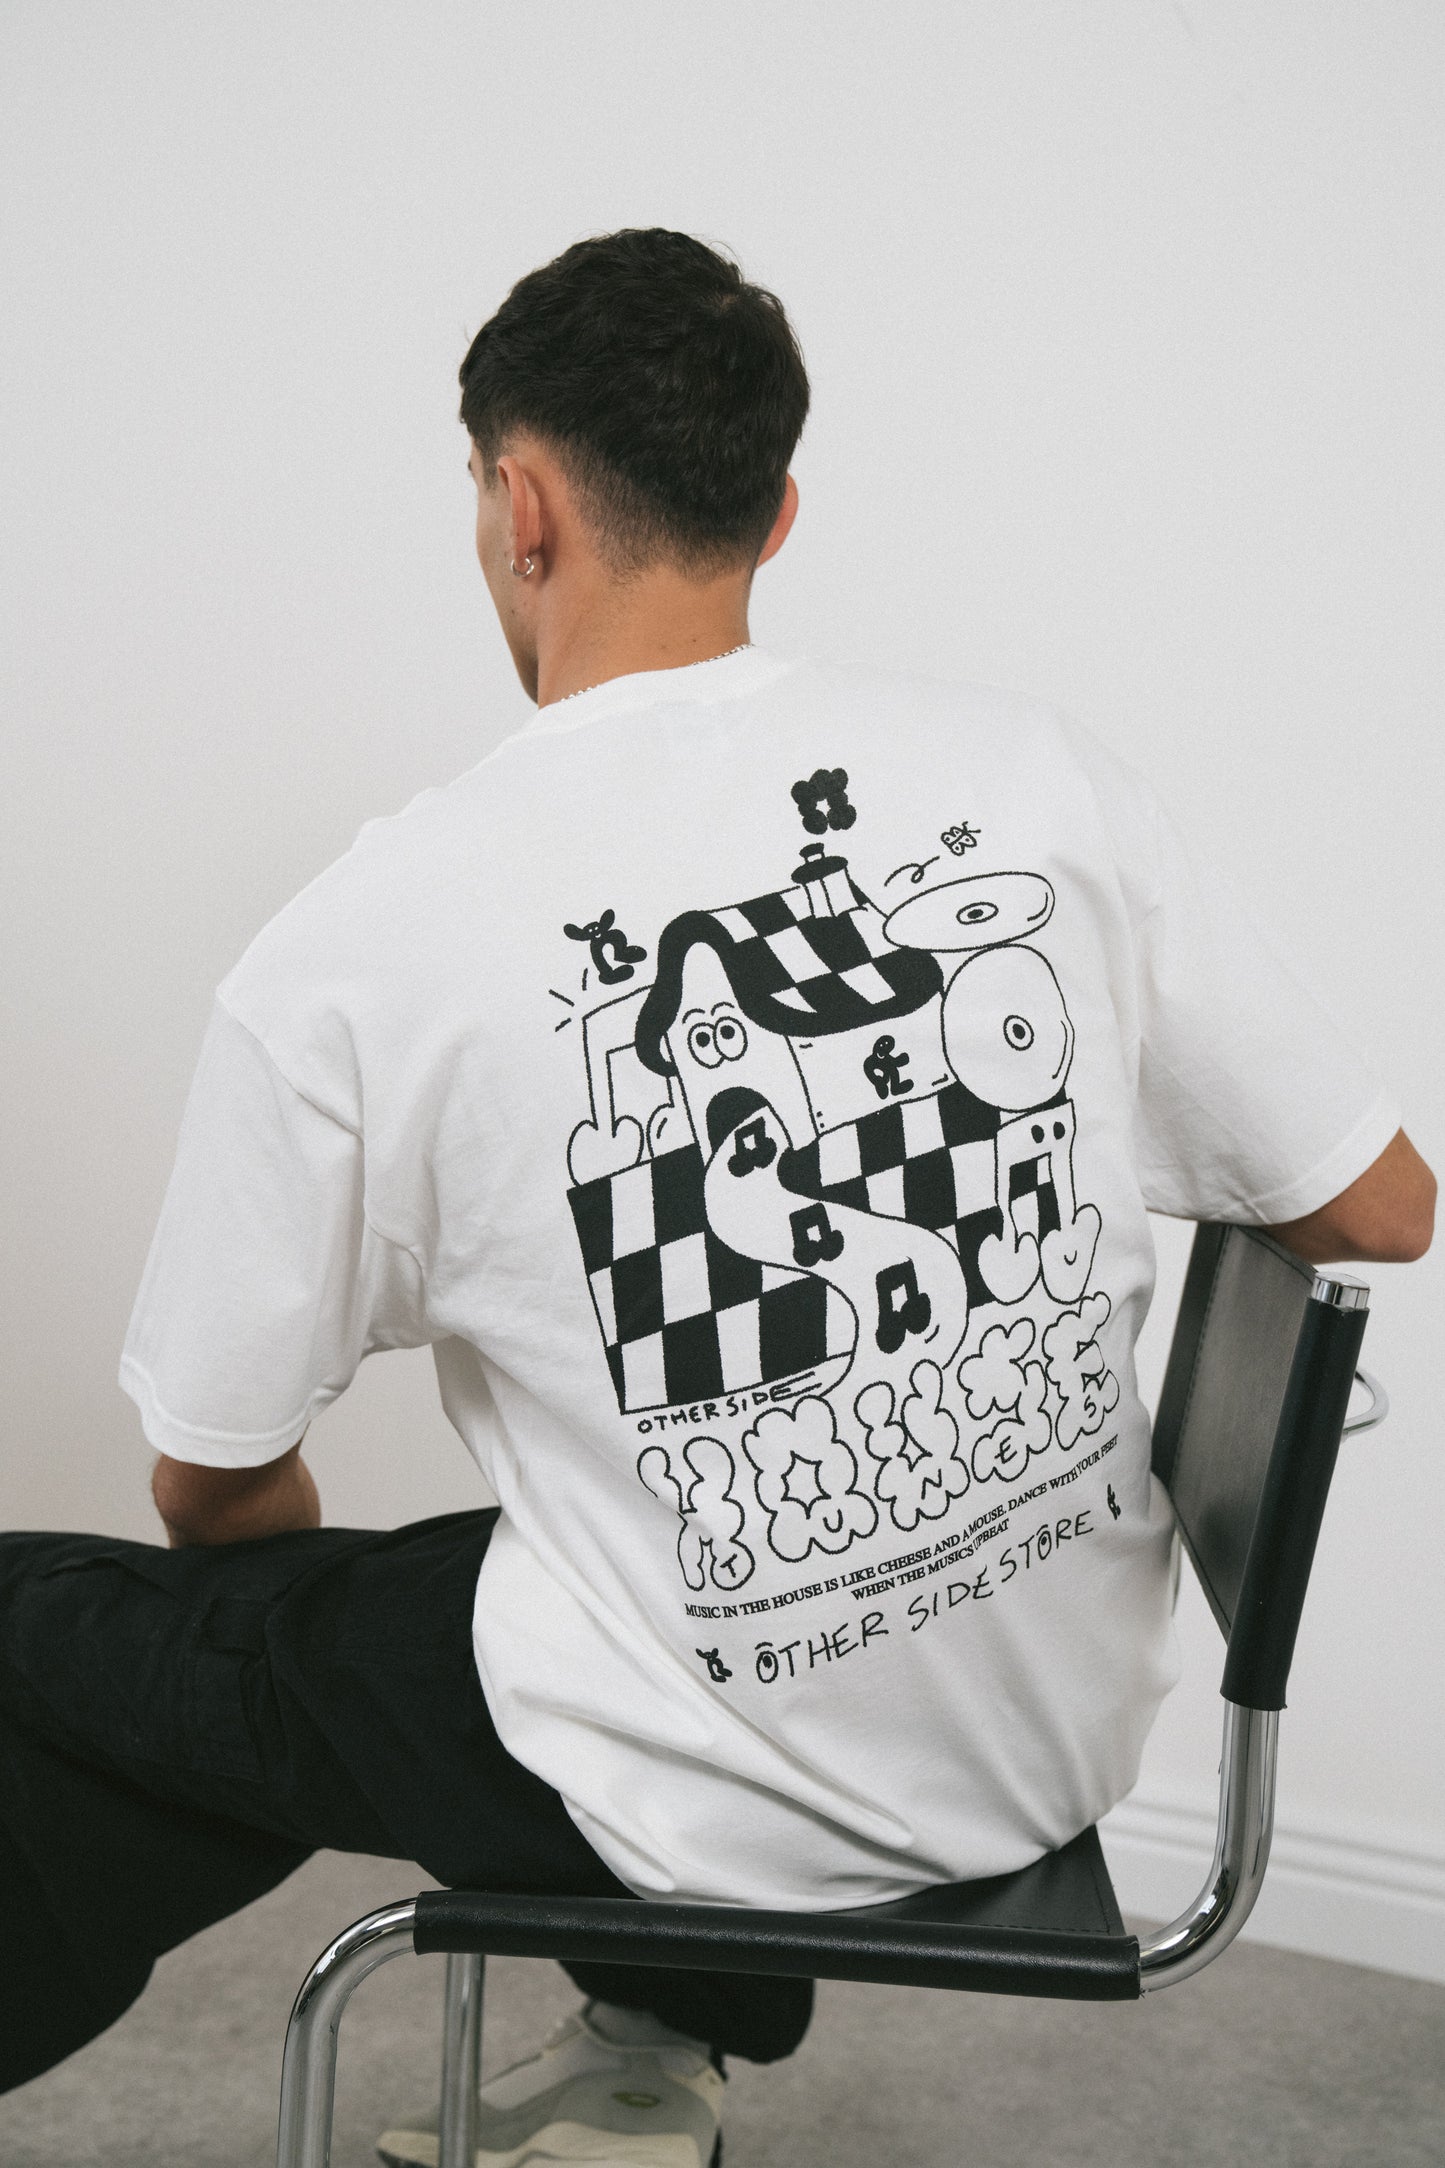 Other Side Store 'House Tunes' Tee - White